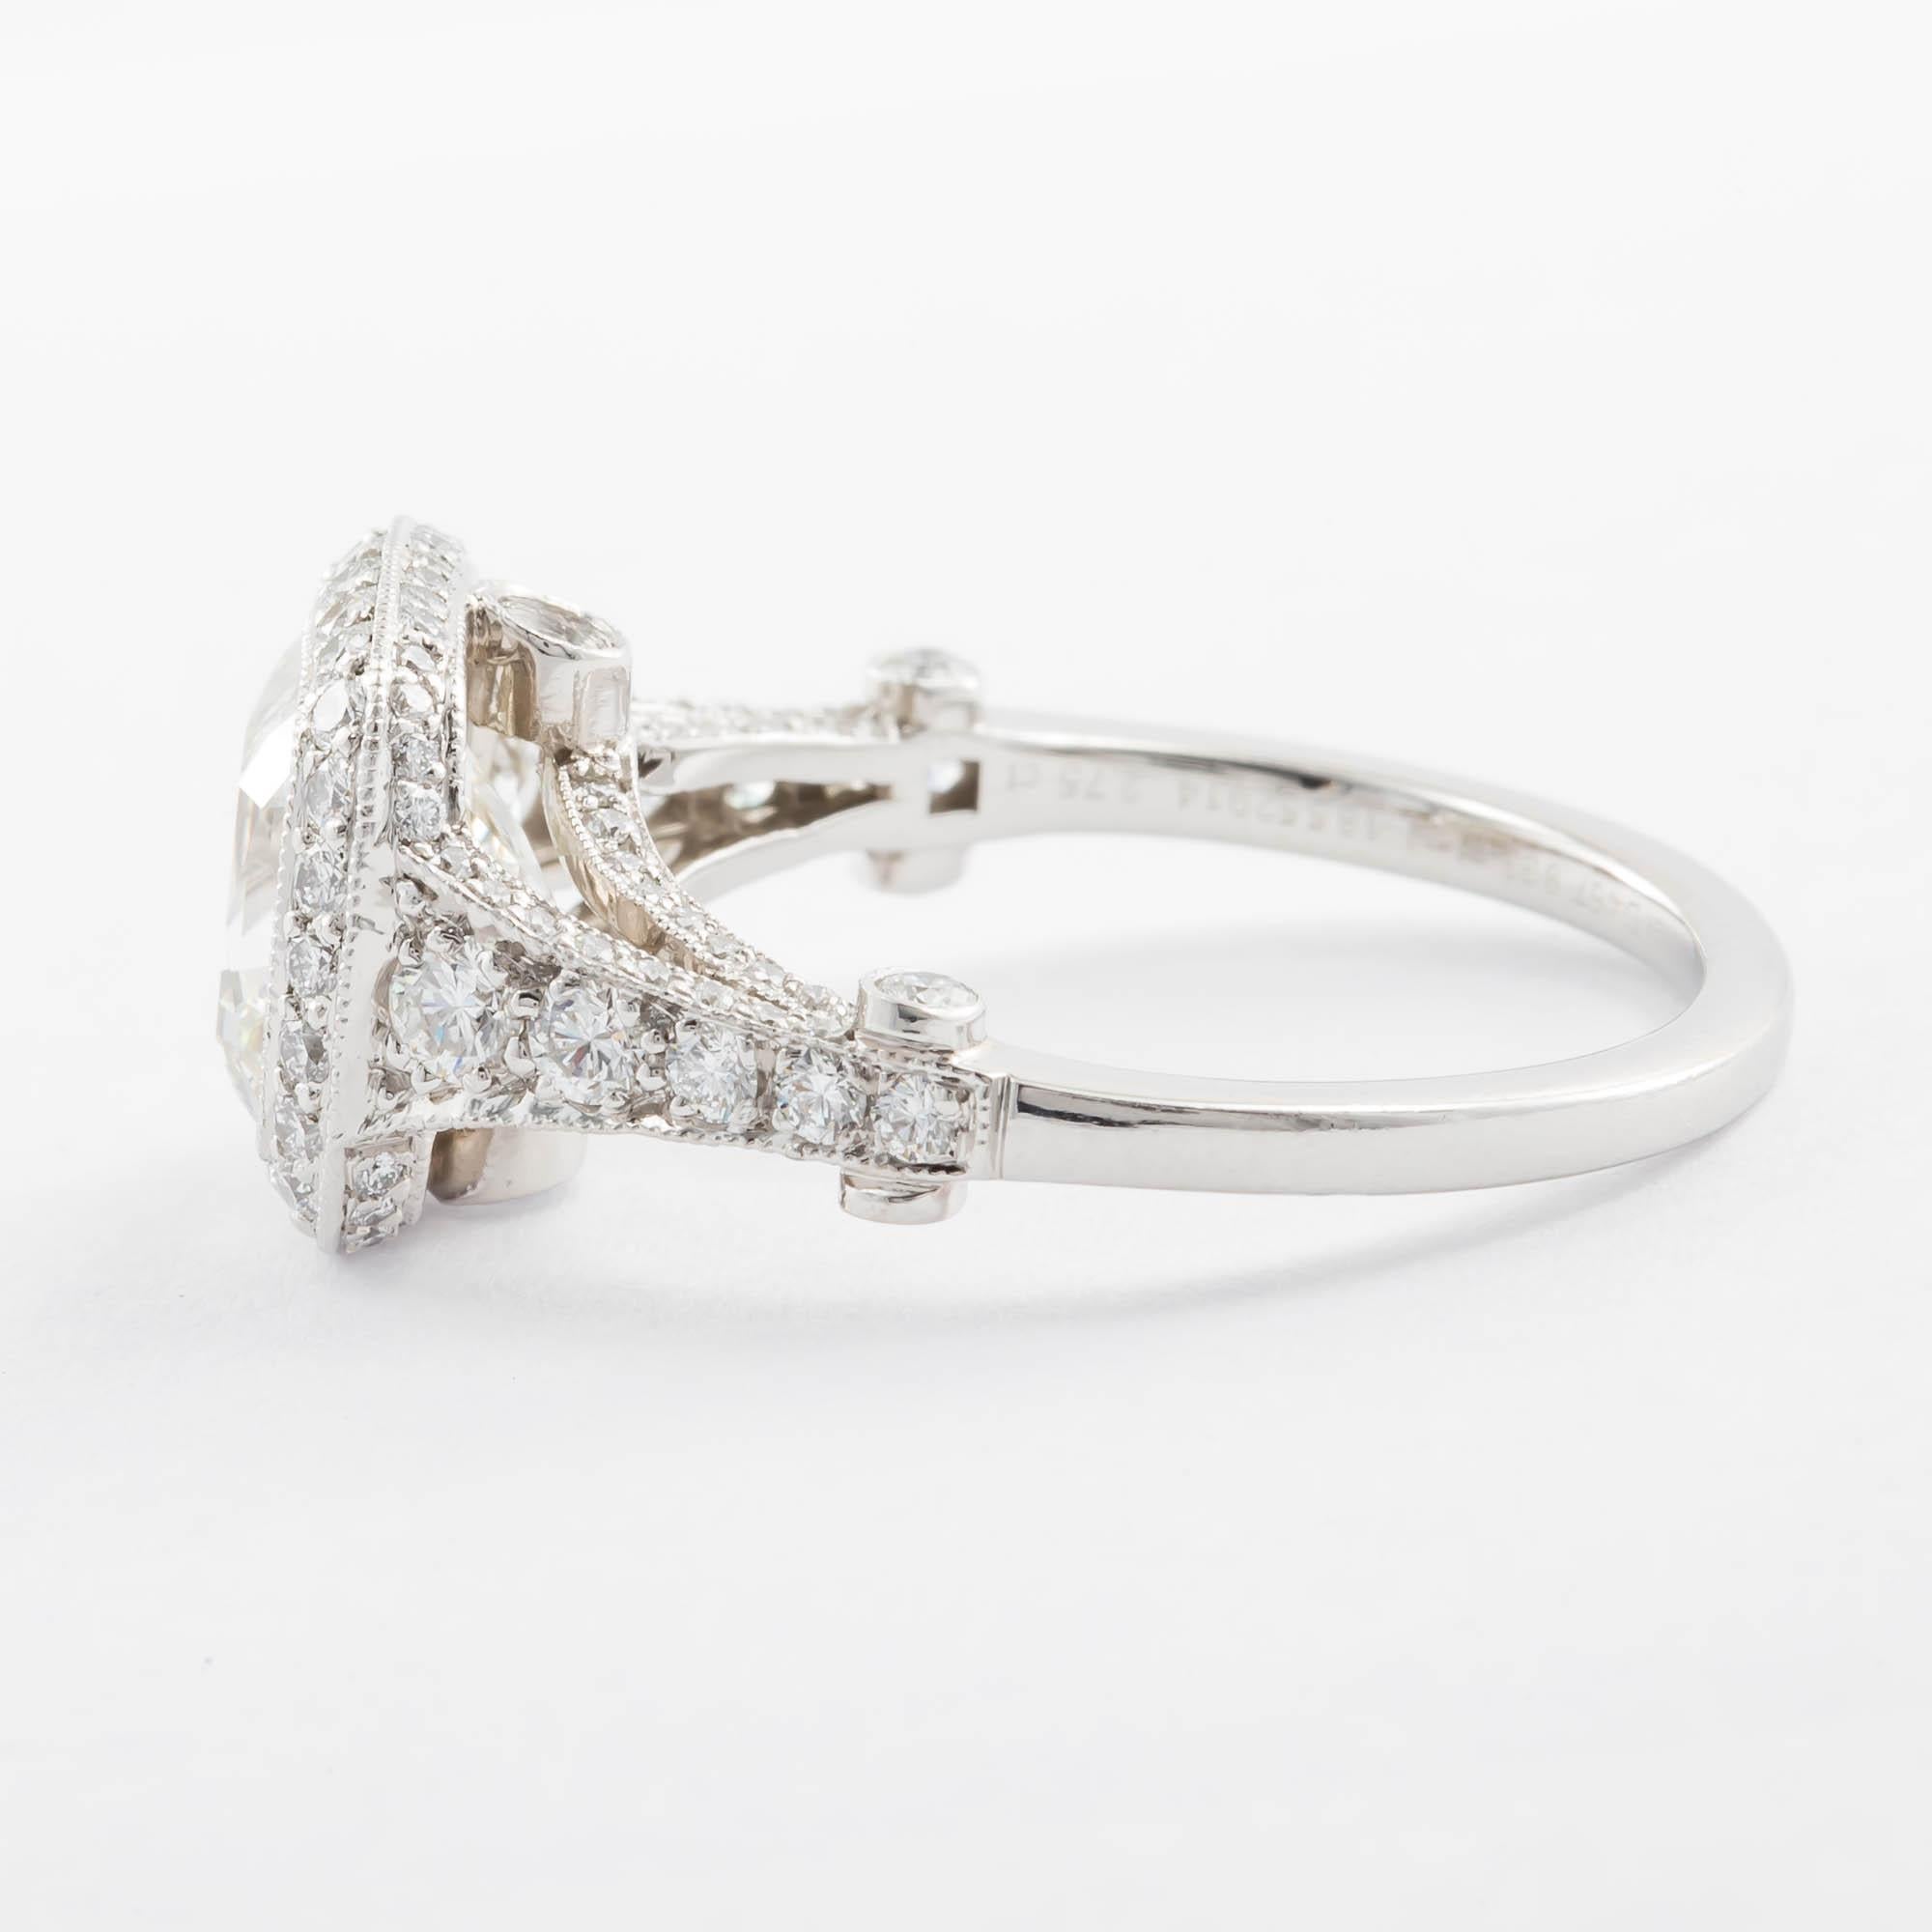 Platinum cushion diamond engagement ring by Tiffany & Company. Consisting of one GIA cushion cut diamond weighing 2.75 carats with color and clarity grade of I VVS1 the diamond is set into a stunning beaded bezel set pave mounting with diamonds set